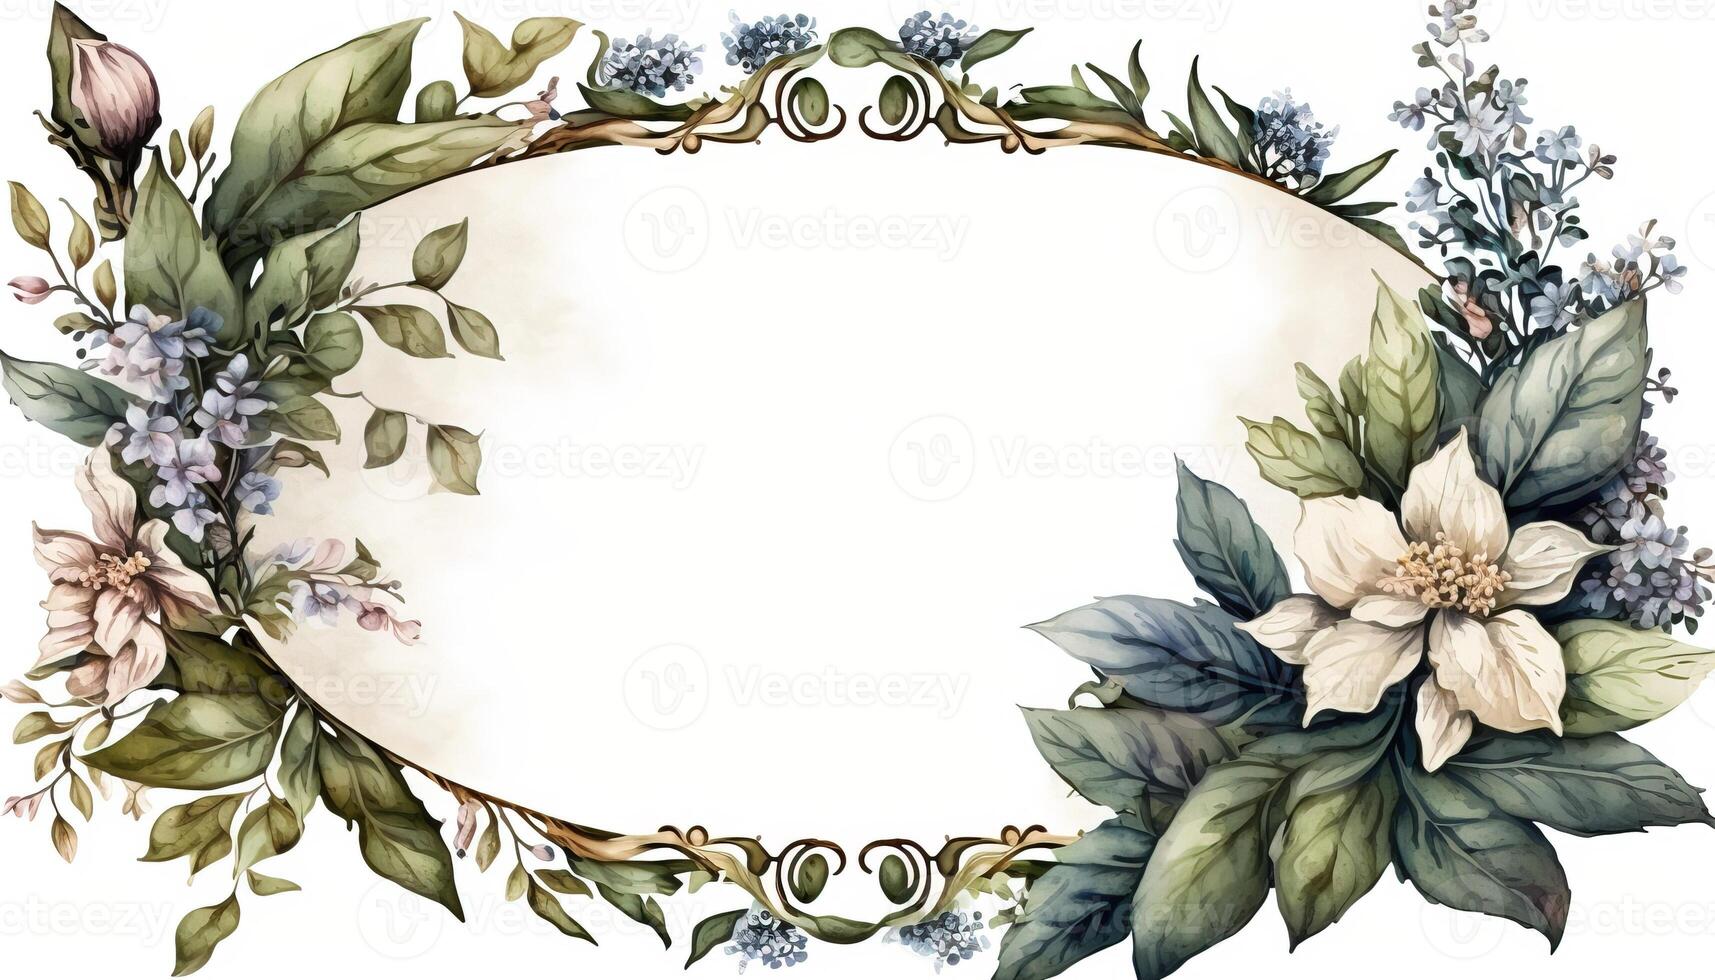 , Watercolor frame with spring flowers, hand drawn art style with place for text. Greeting, birthday and other holiday, wedding invitation concept photo